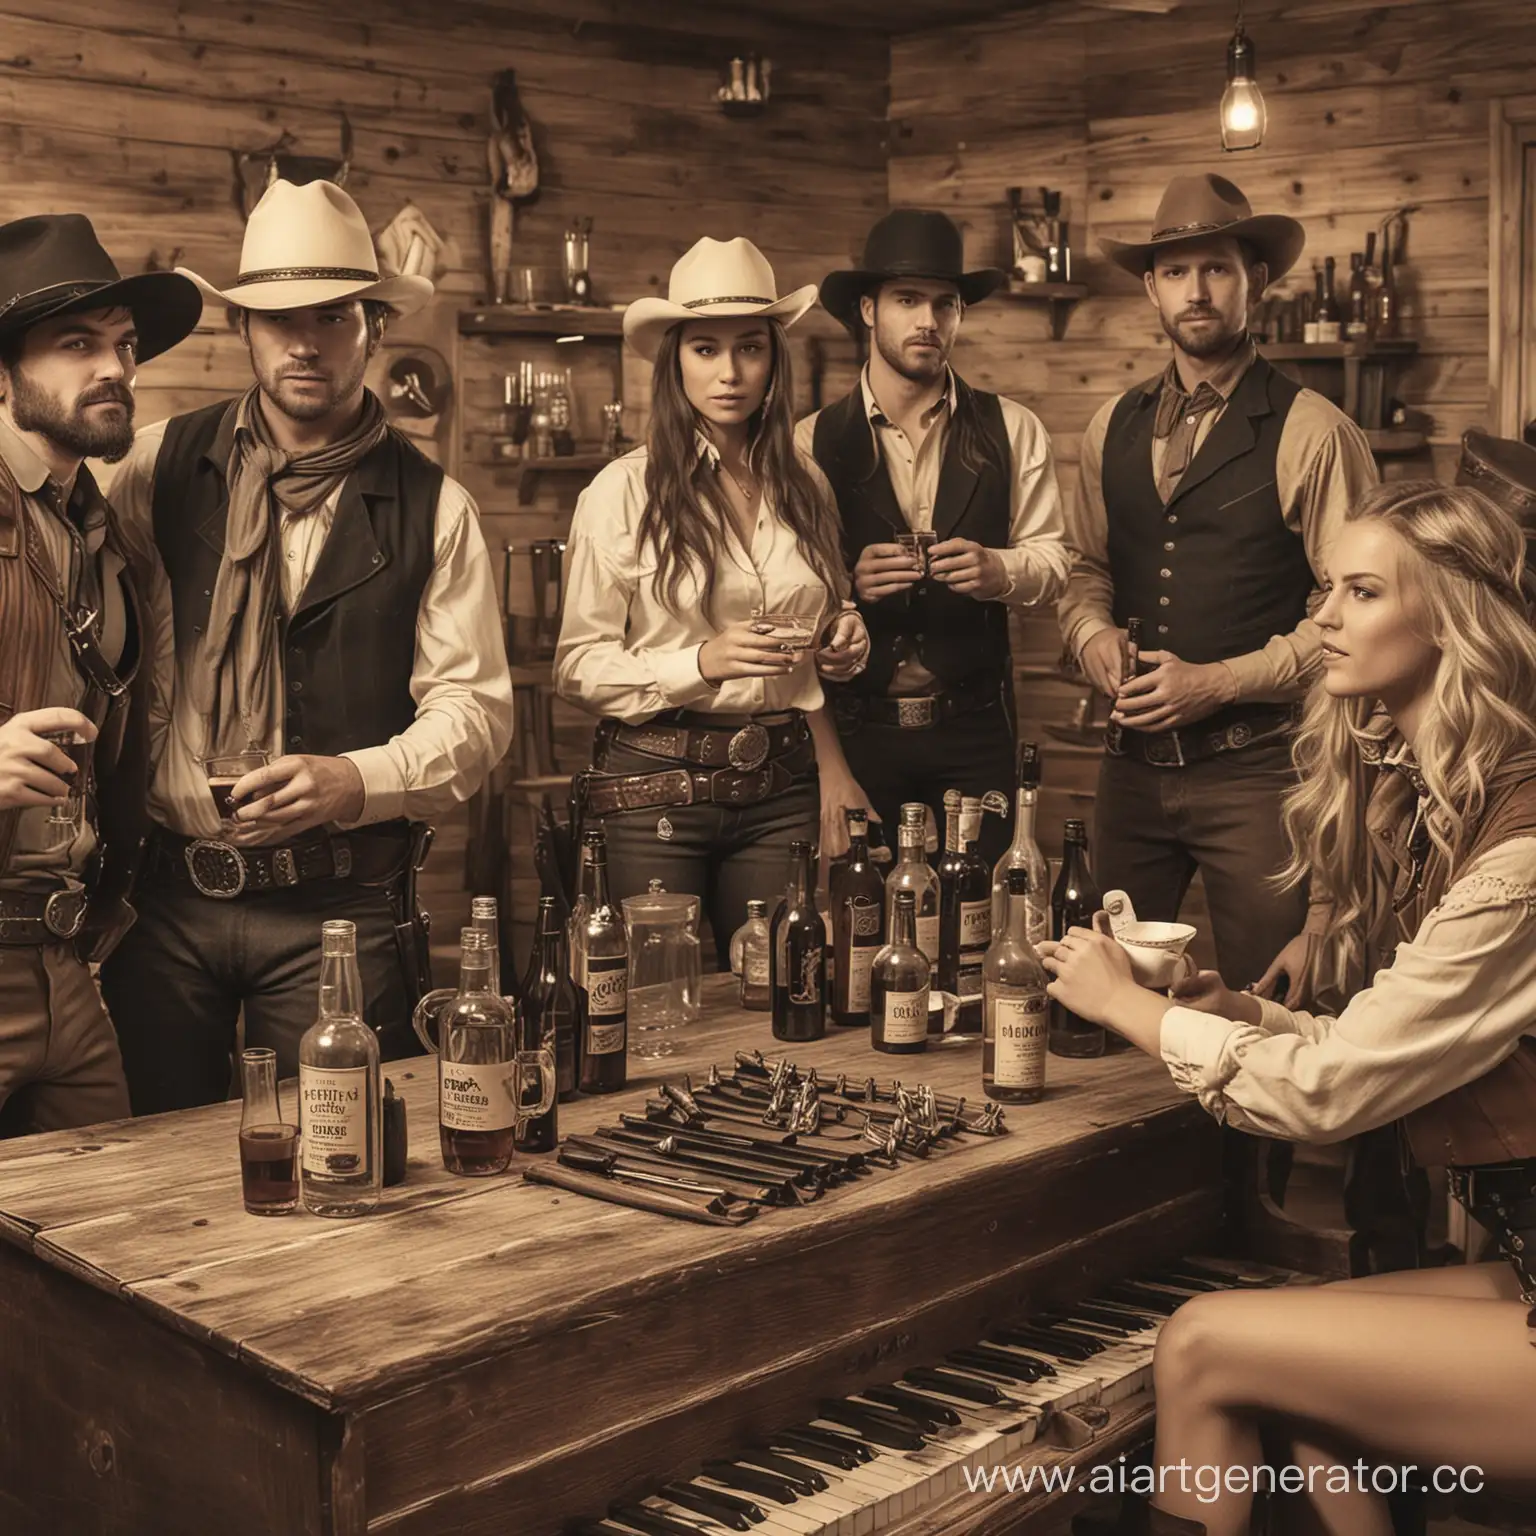 Wild-West-Cowboy-Party-with-Guns-and-Music